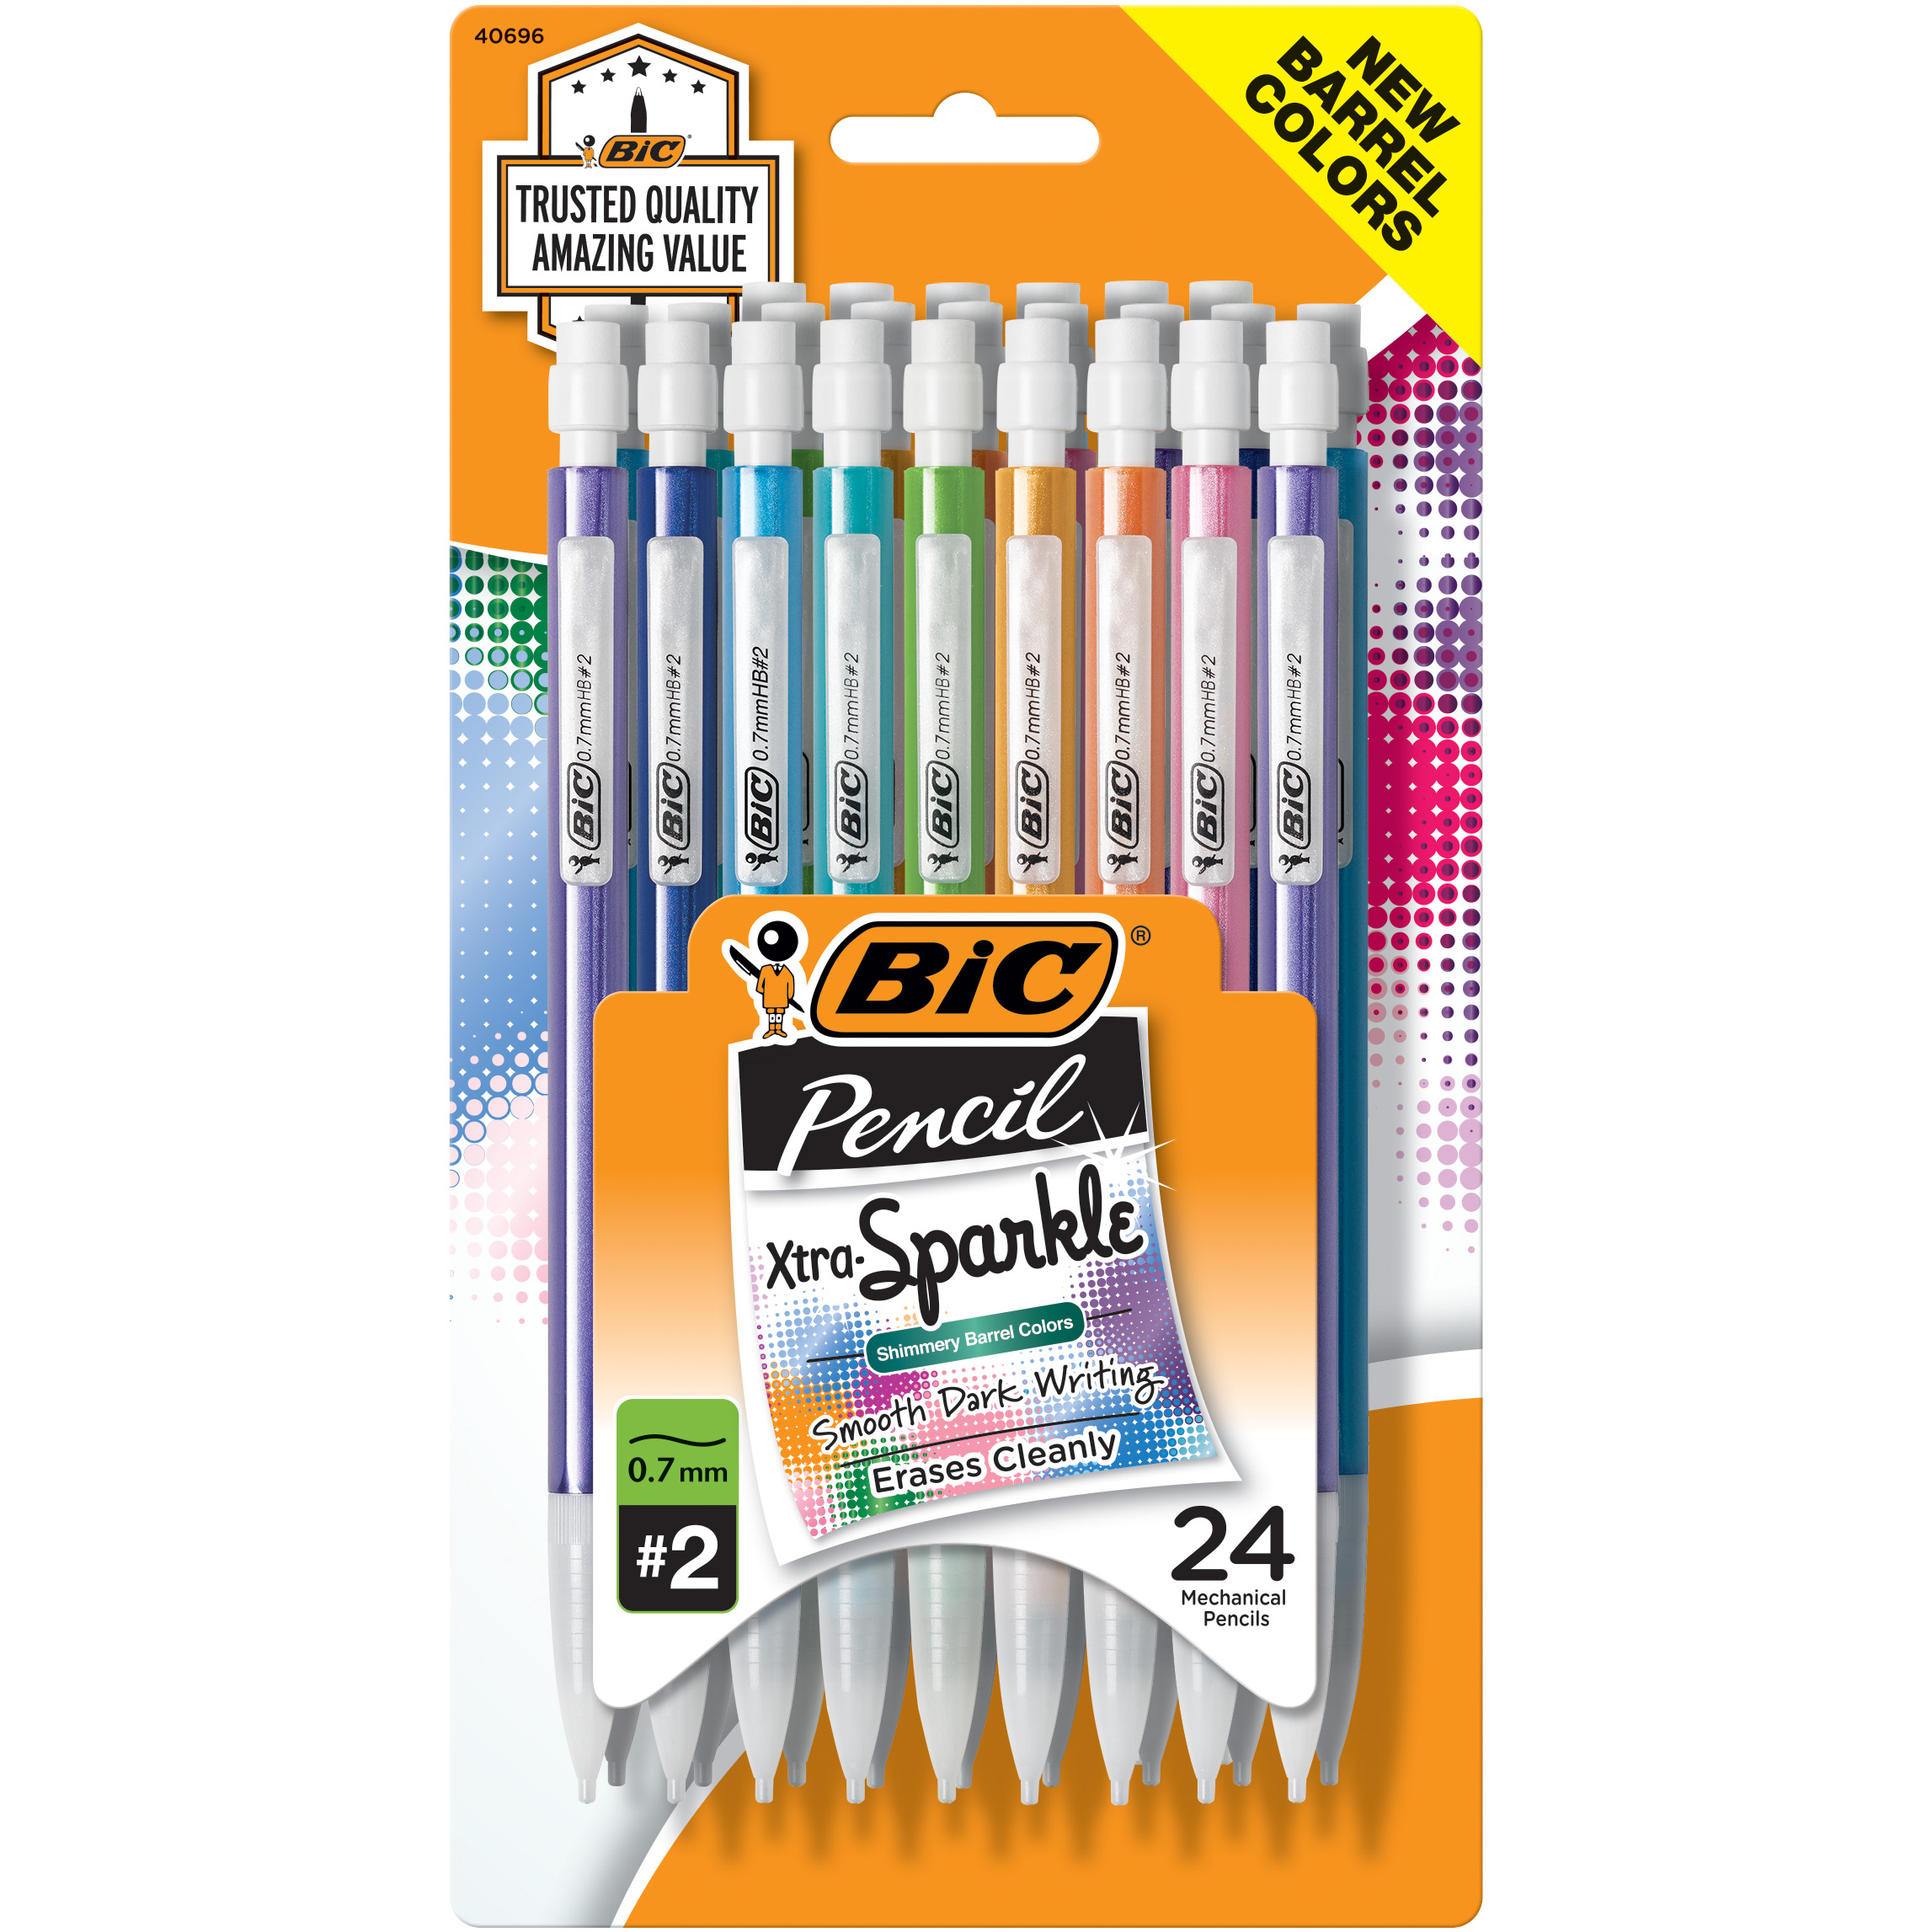 BIC Xtra-Sparkle No. 2 Mechanical Pencils with Erasers, Medium Point (0.7mm), 24 Pencils - image 1 of 13